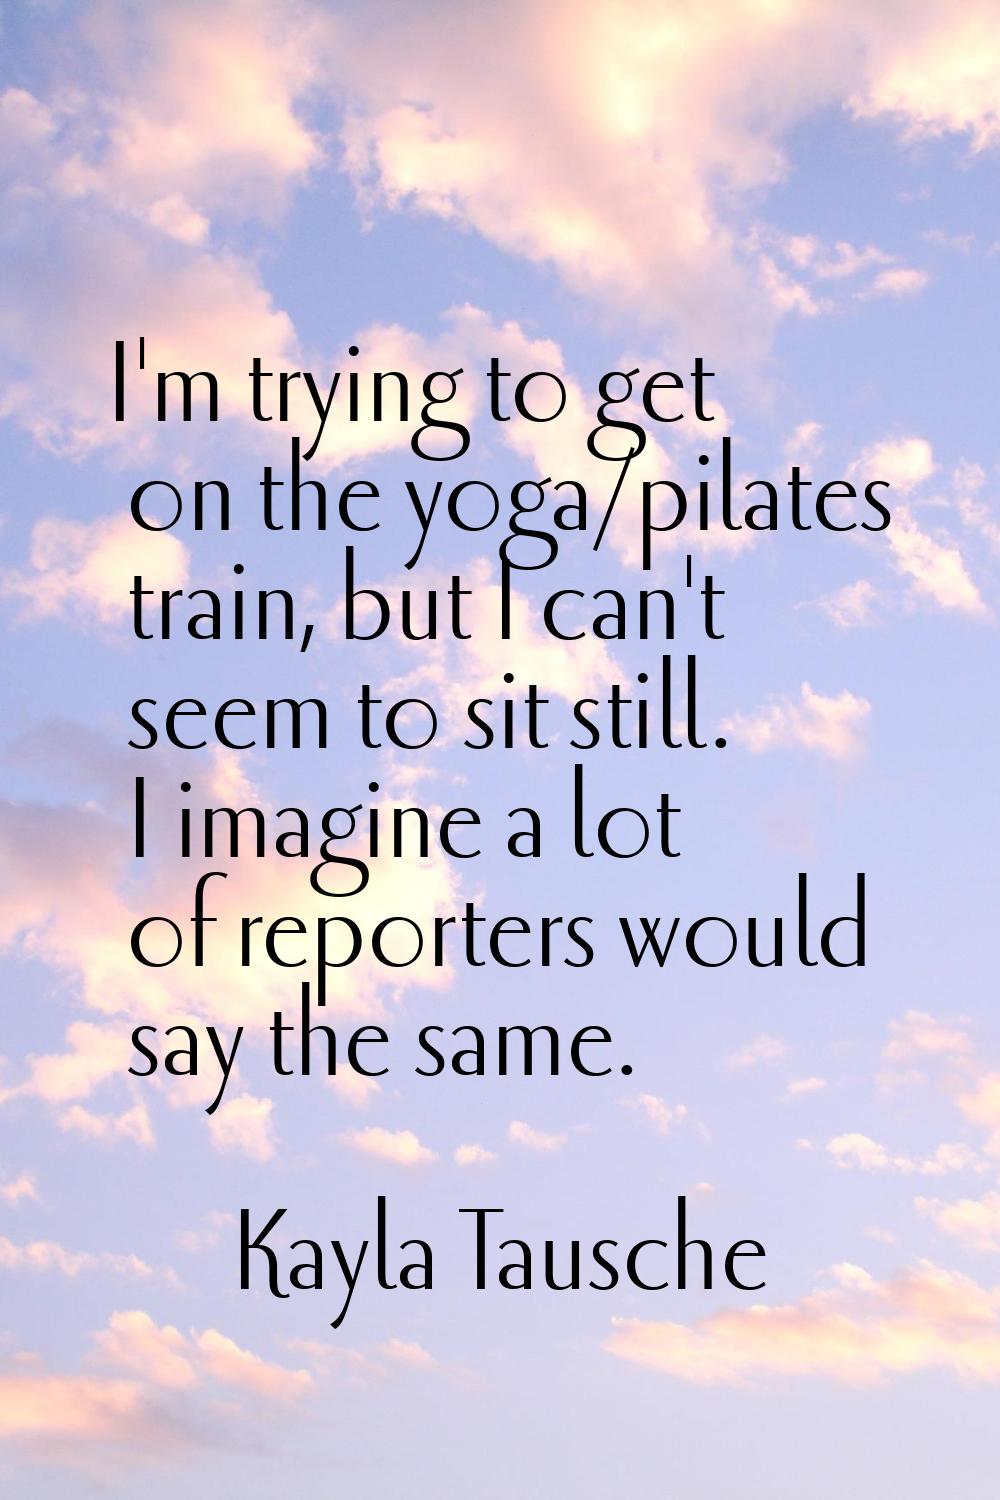 I'm trying to get on the yoga/pilates train, but I can't seem to sit still. I imagine a lot of repo